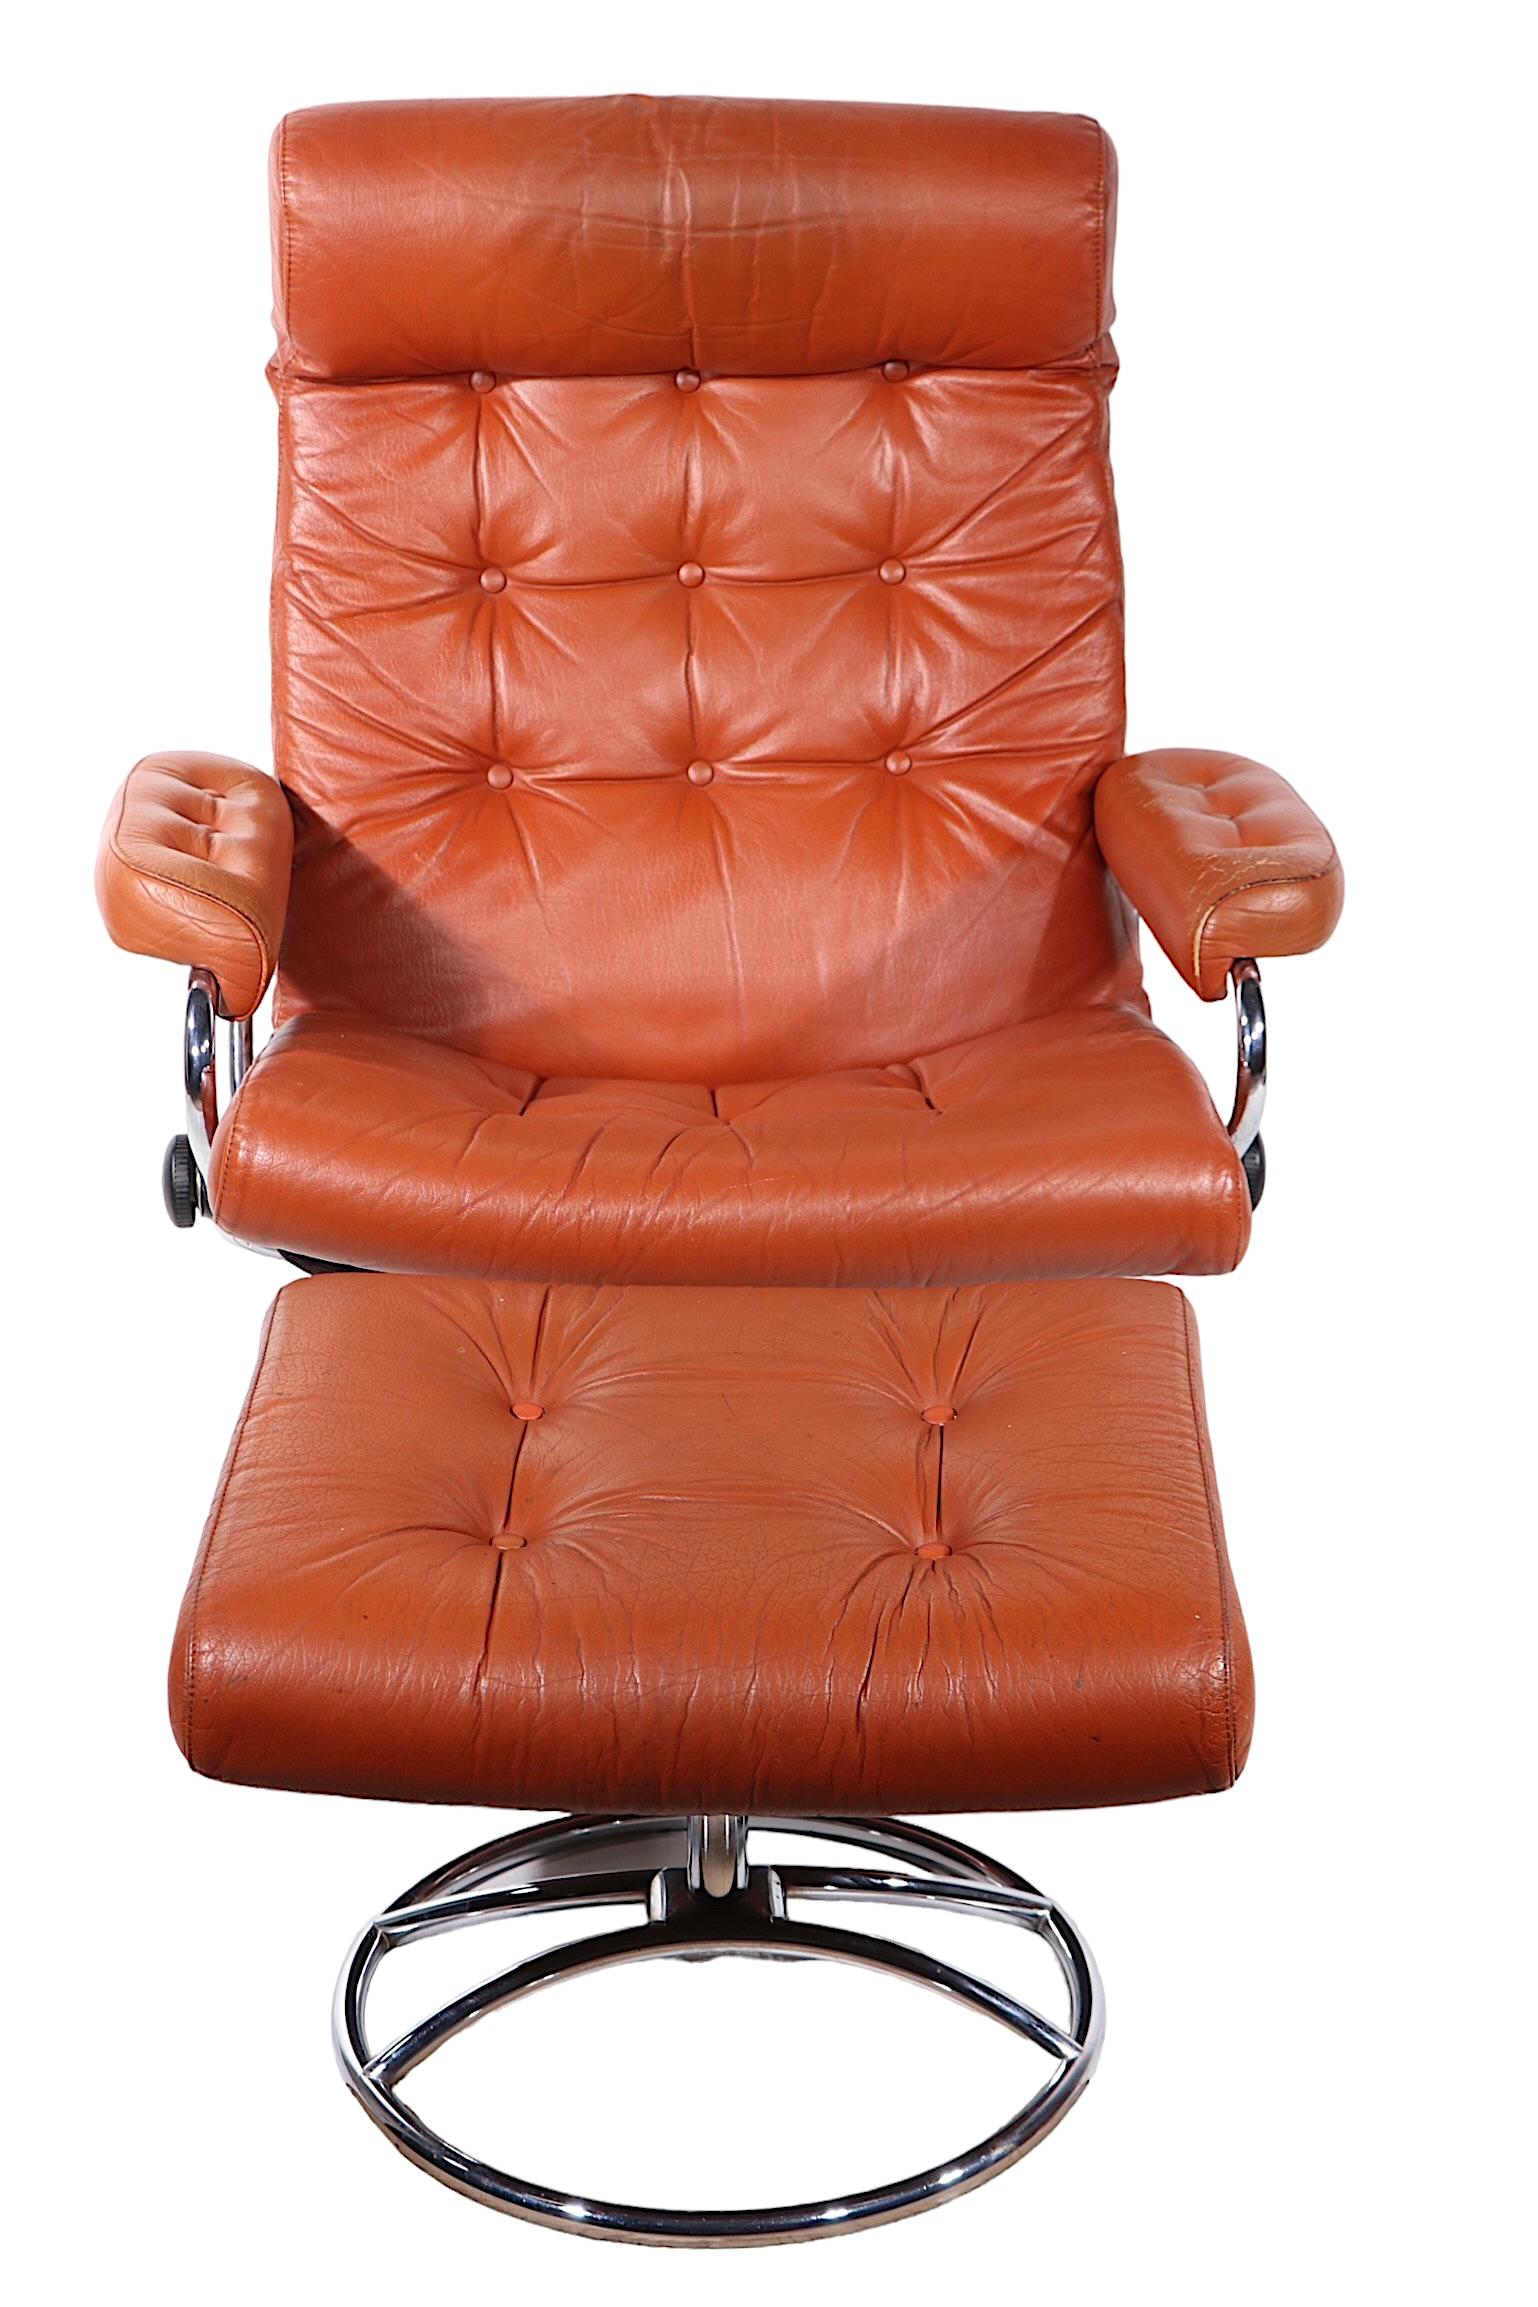 Vintage Mid Century  Brown Leather and Chrome Reclining Chair by Ekornes 2